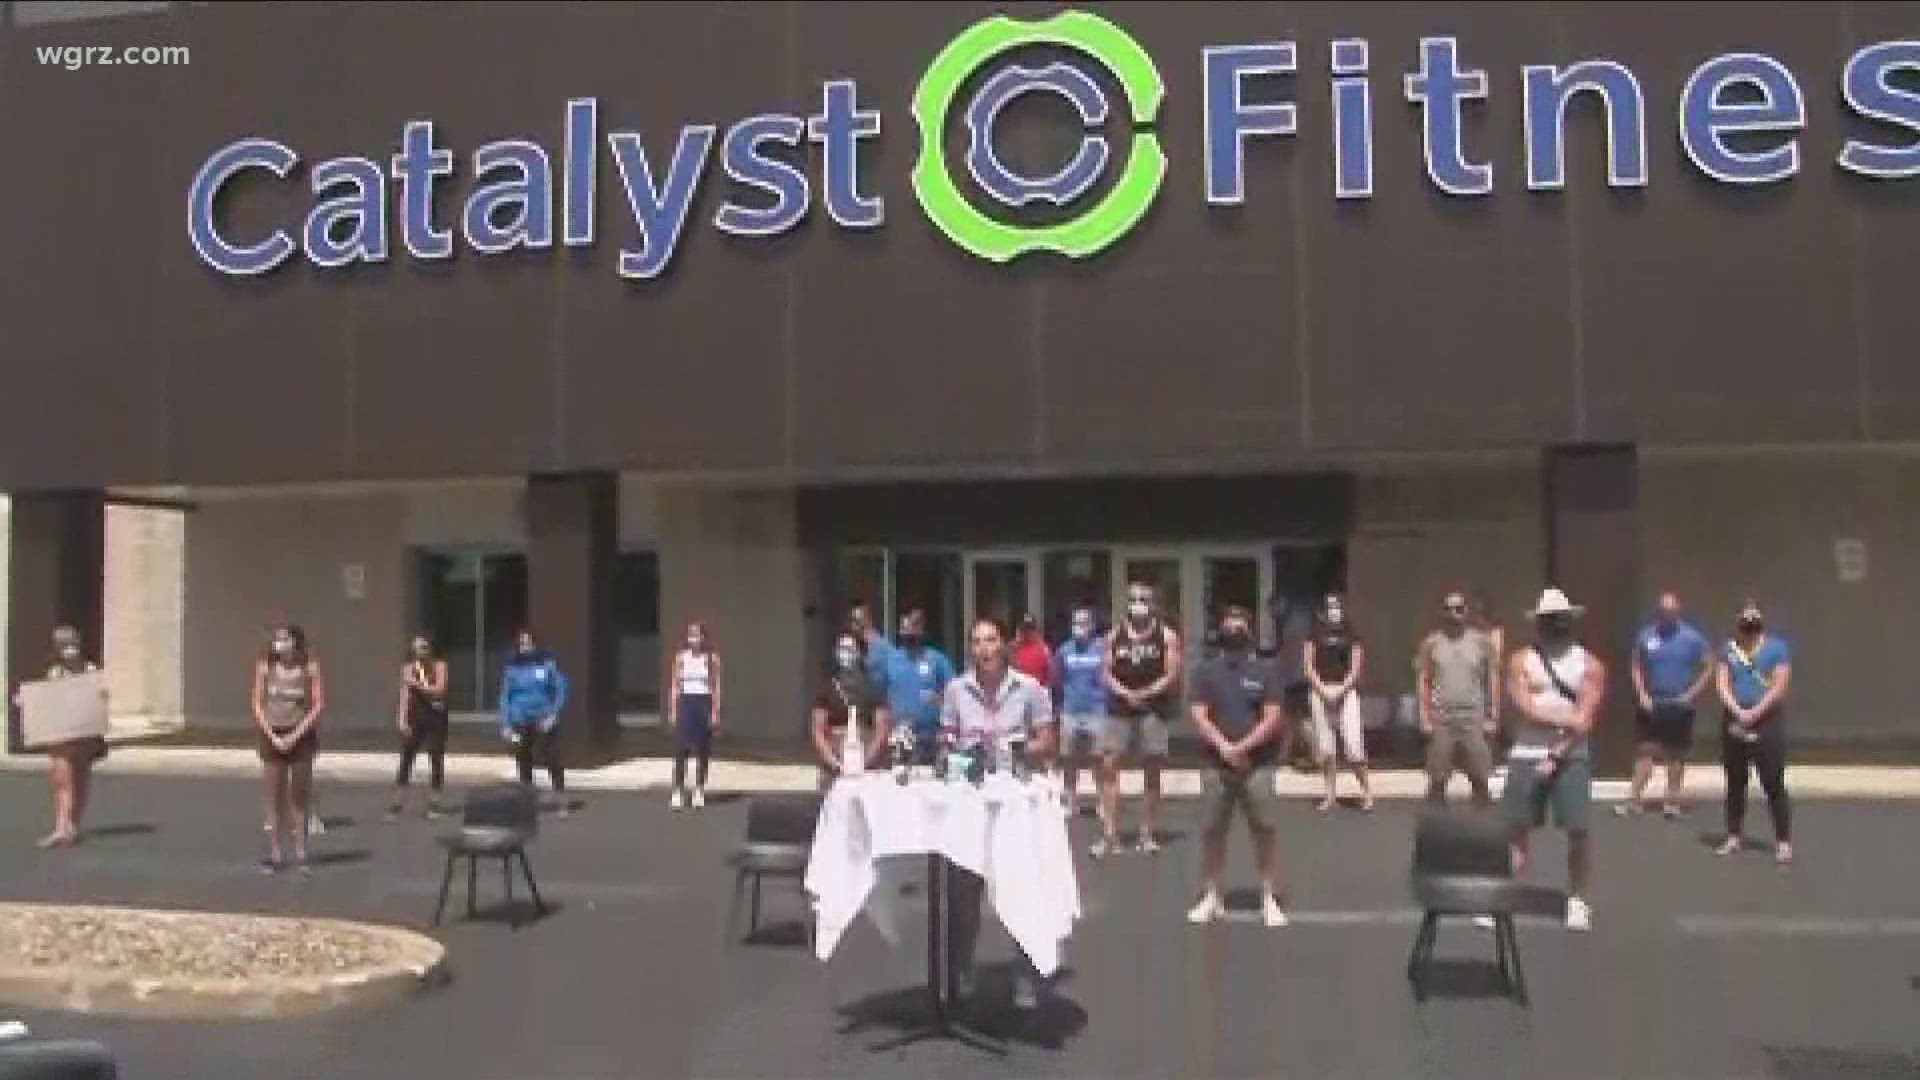 Local gyms rally to open